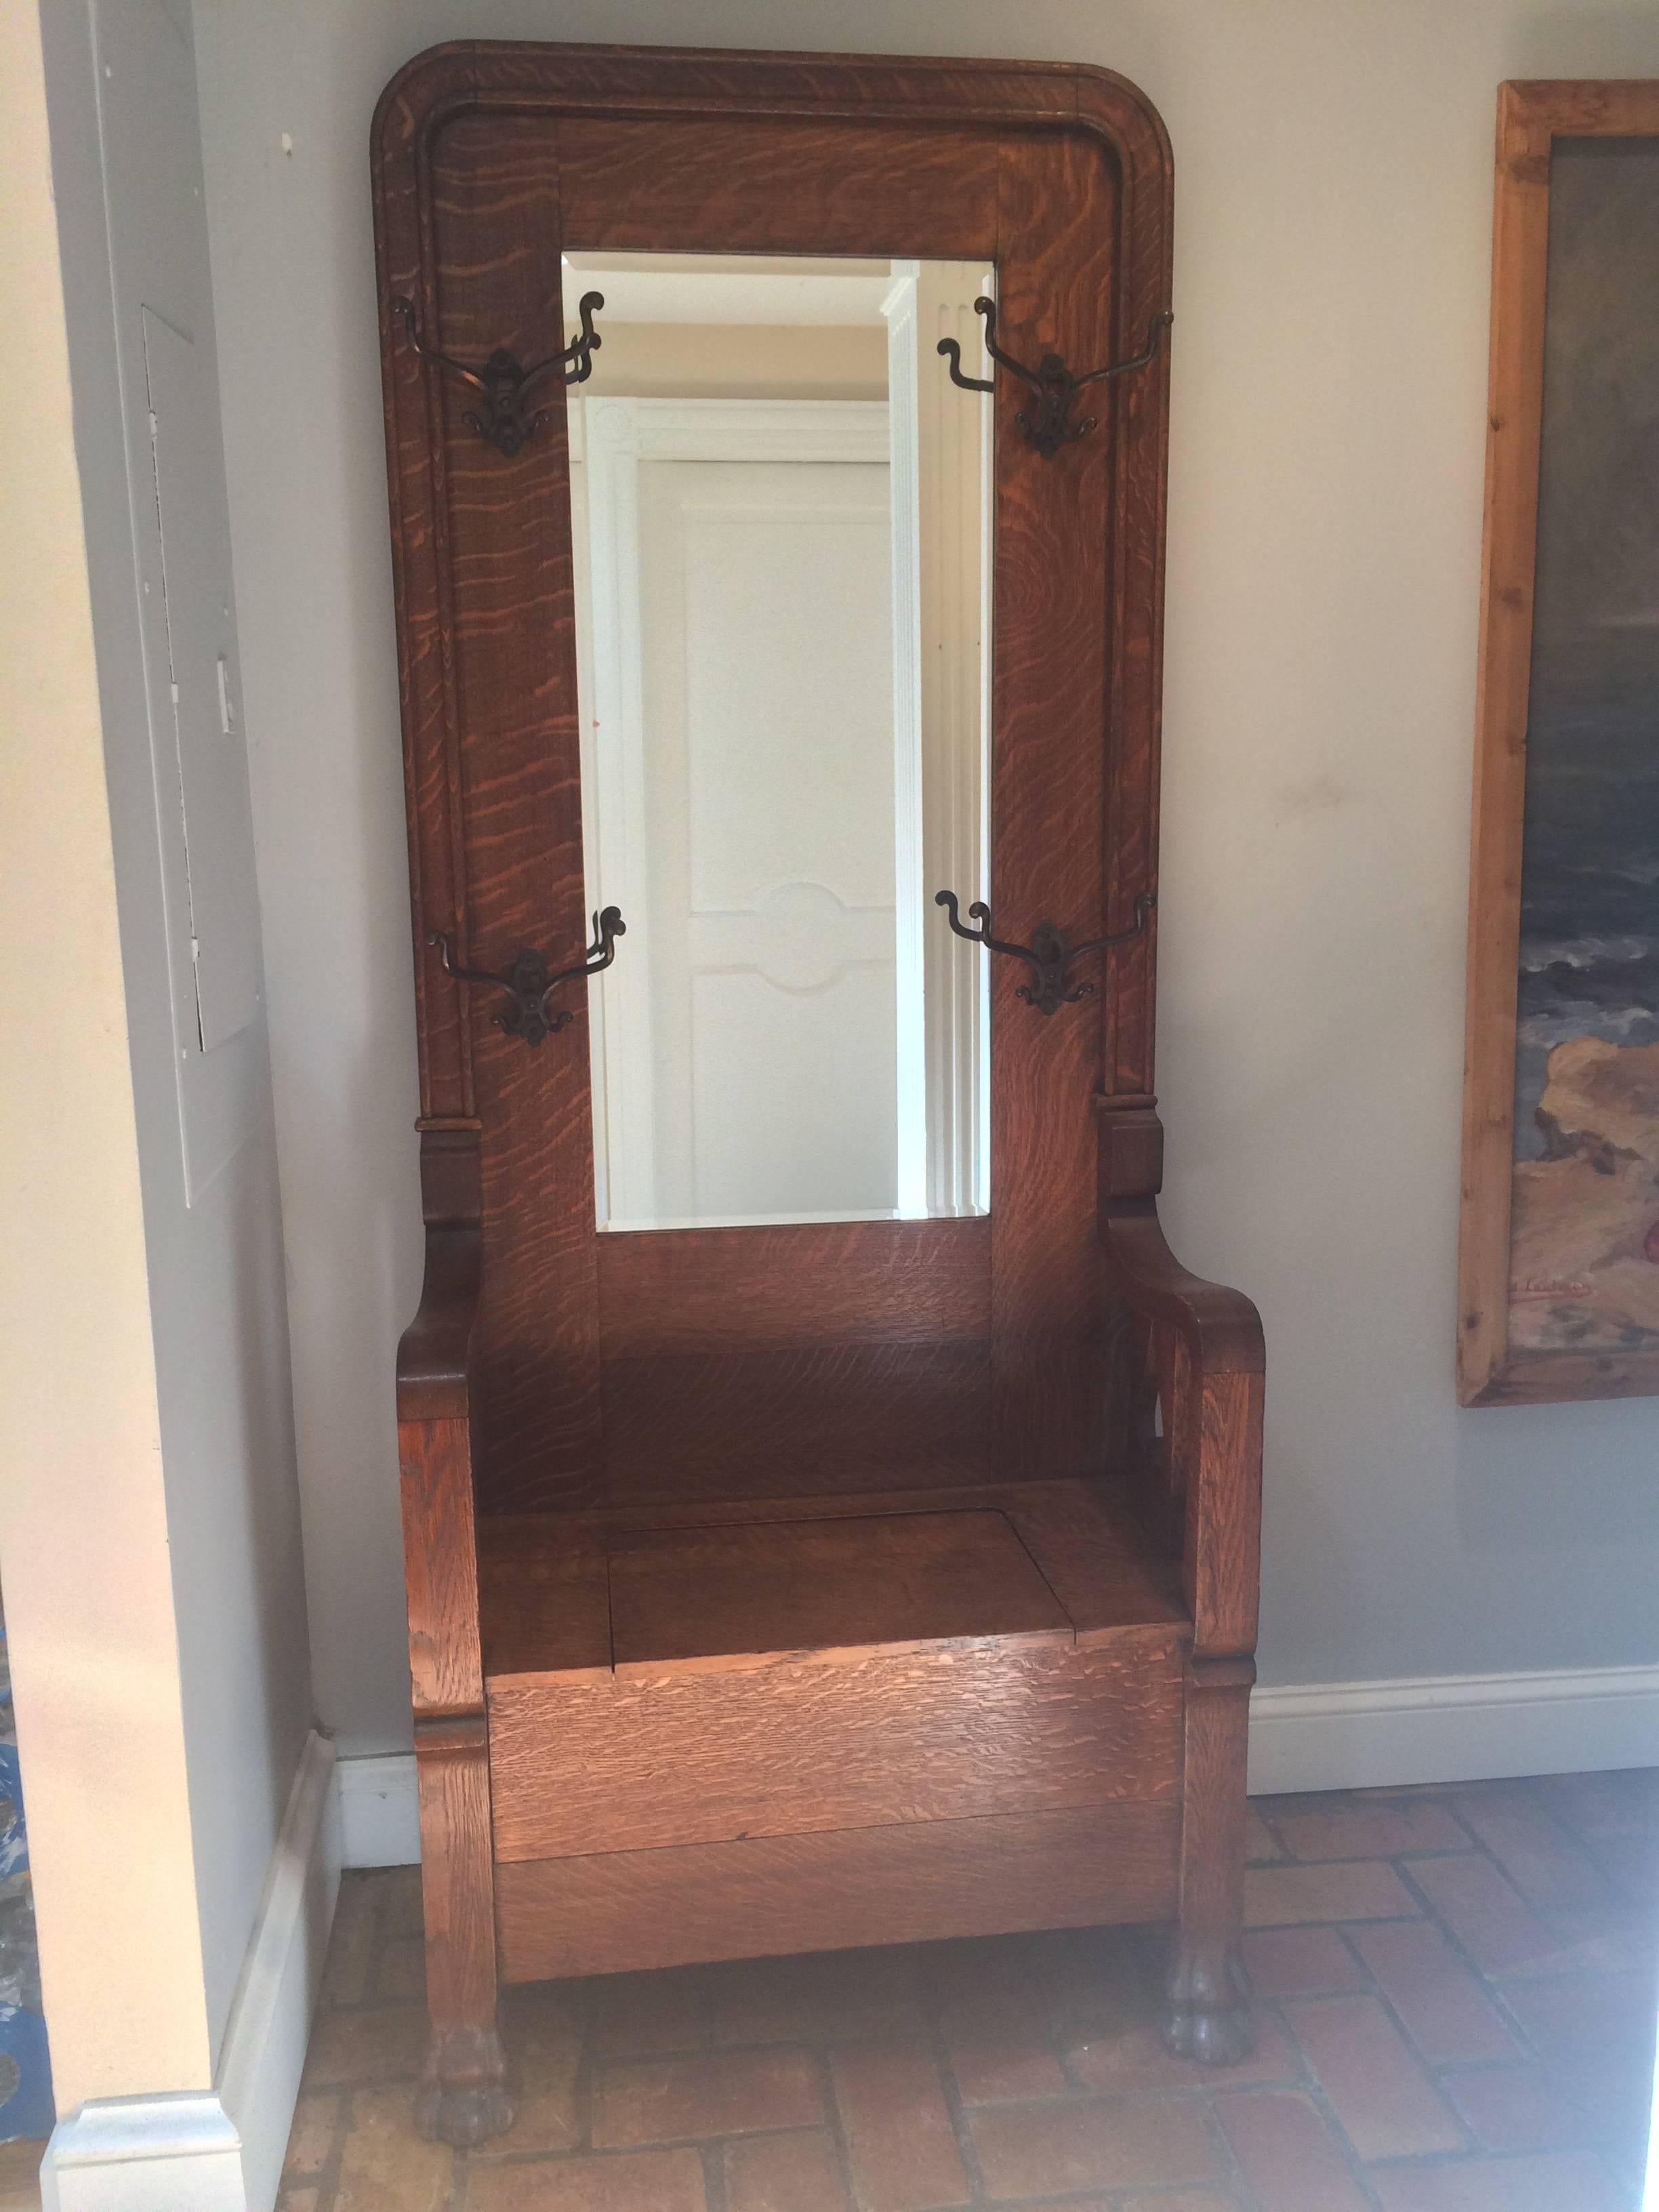 Antique tiger oak hall tree with storage. This beautiful quarter sawn piece will complement any entryway or mudroom while being completely functional. With four original vintage hooks to hold coats, purses, scarves and umbrellas and a one inch